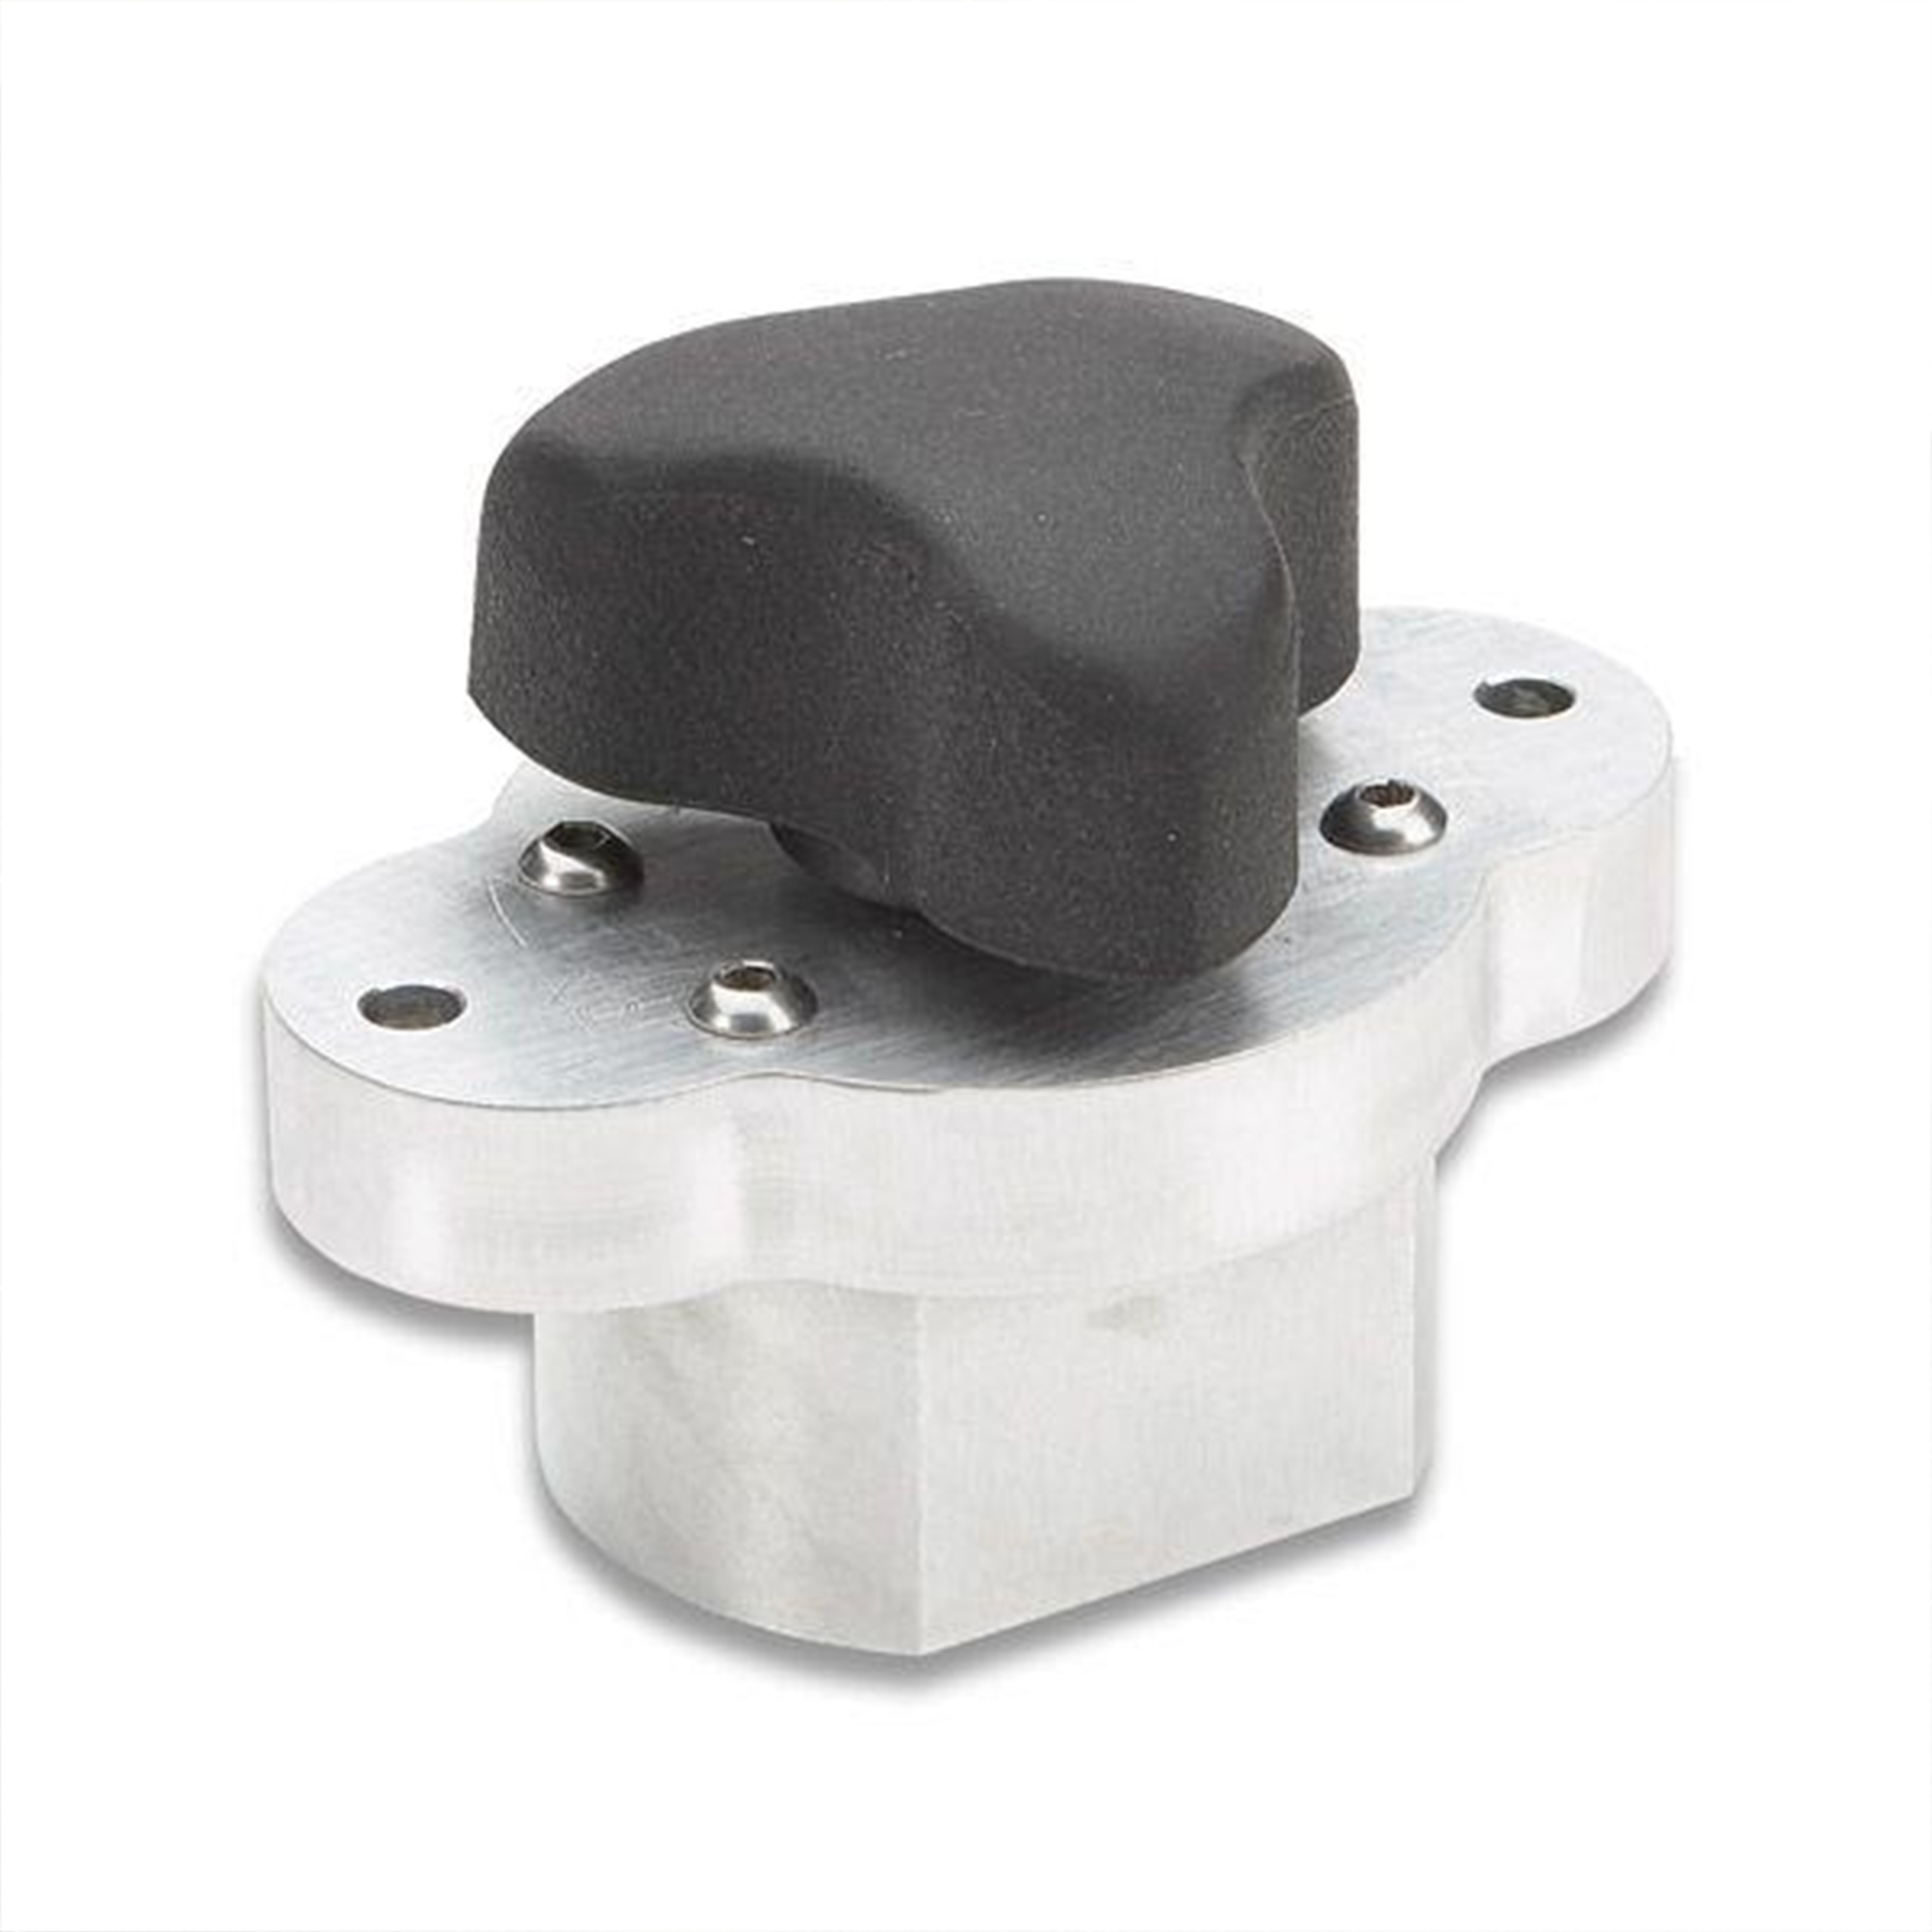 Magjig 150 Switchable Magnet